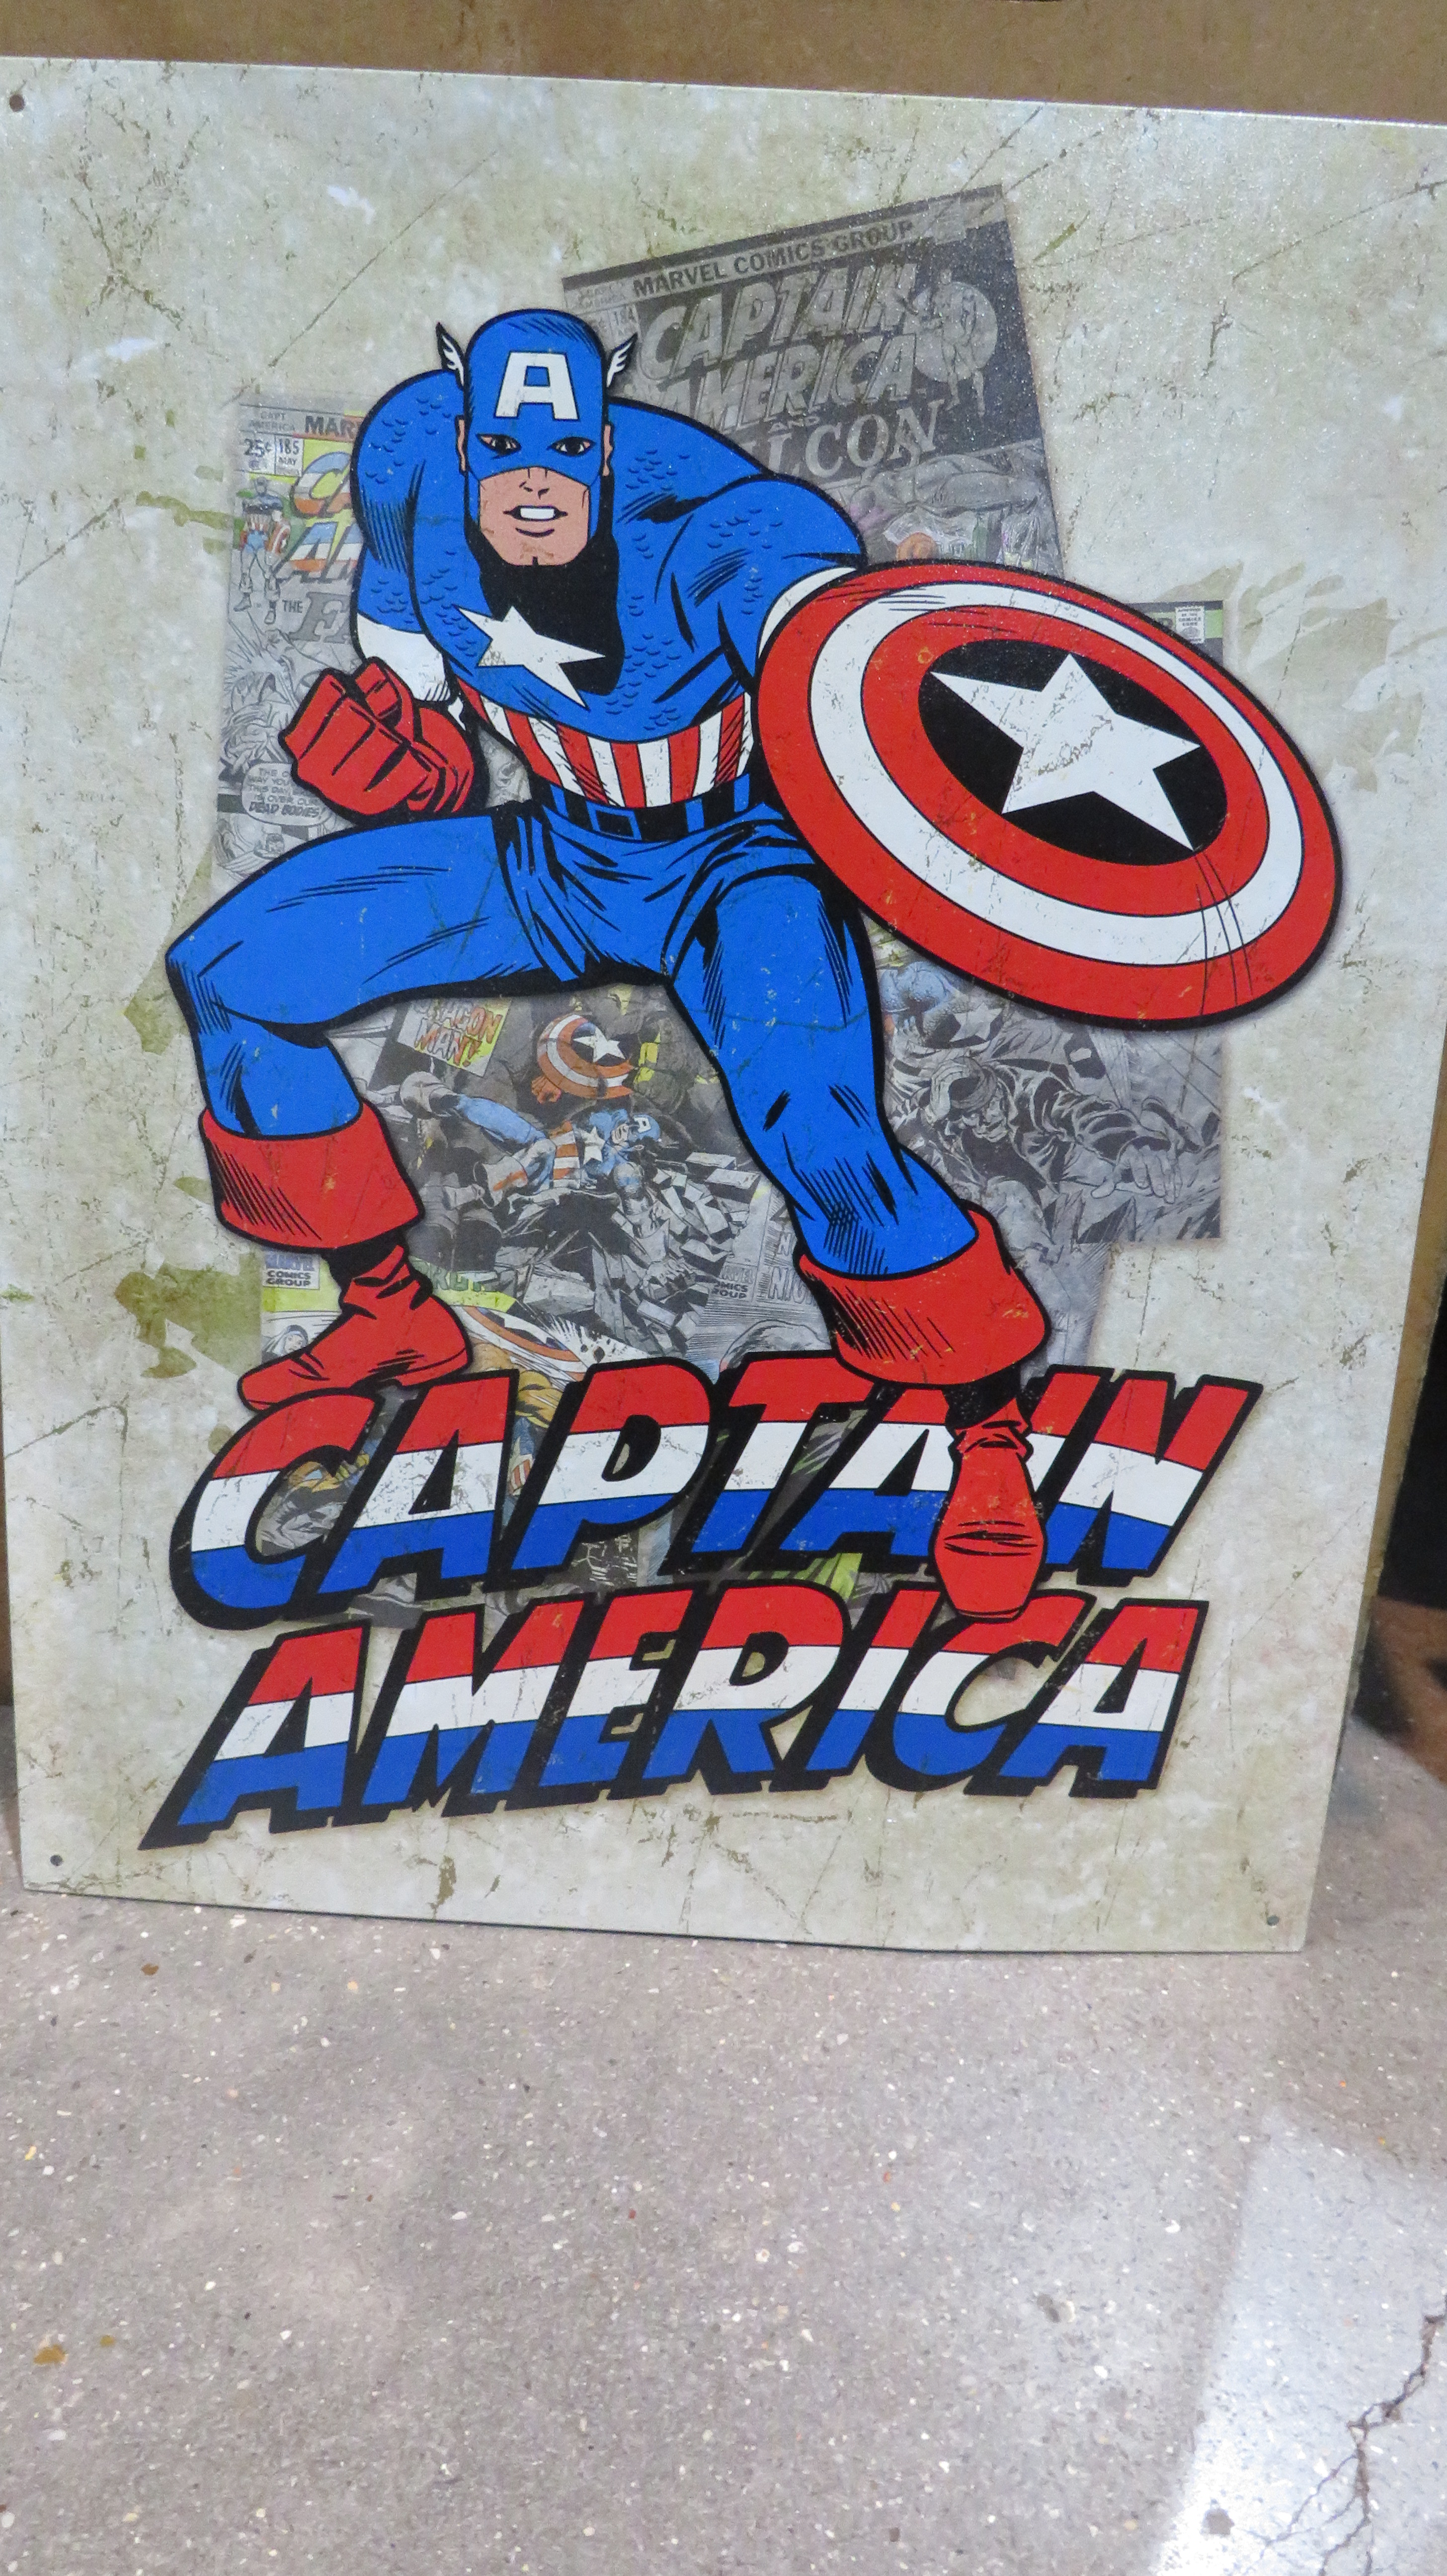 0th Image of a N/A CAPITAL AMERICA VINTAGE